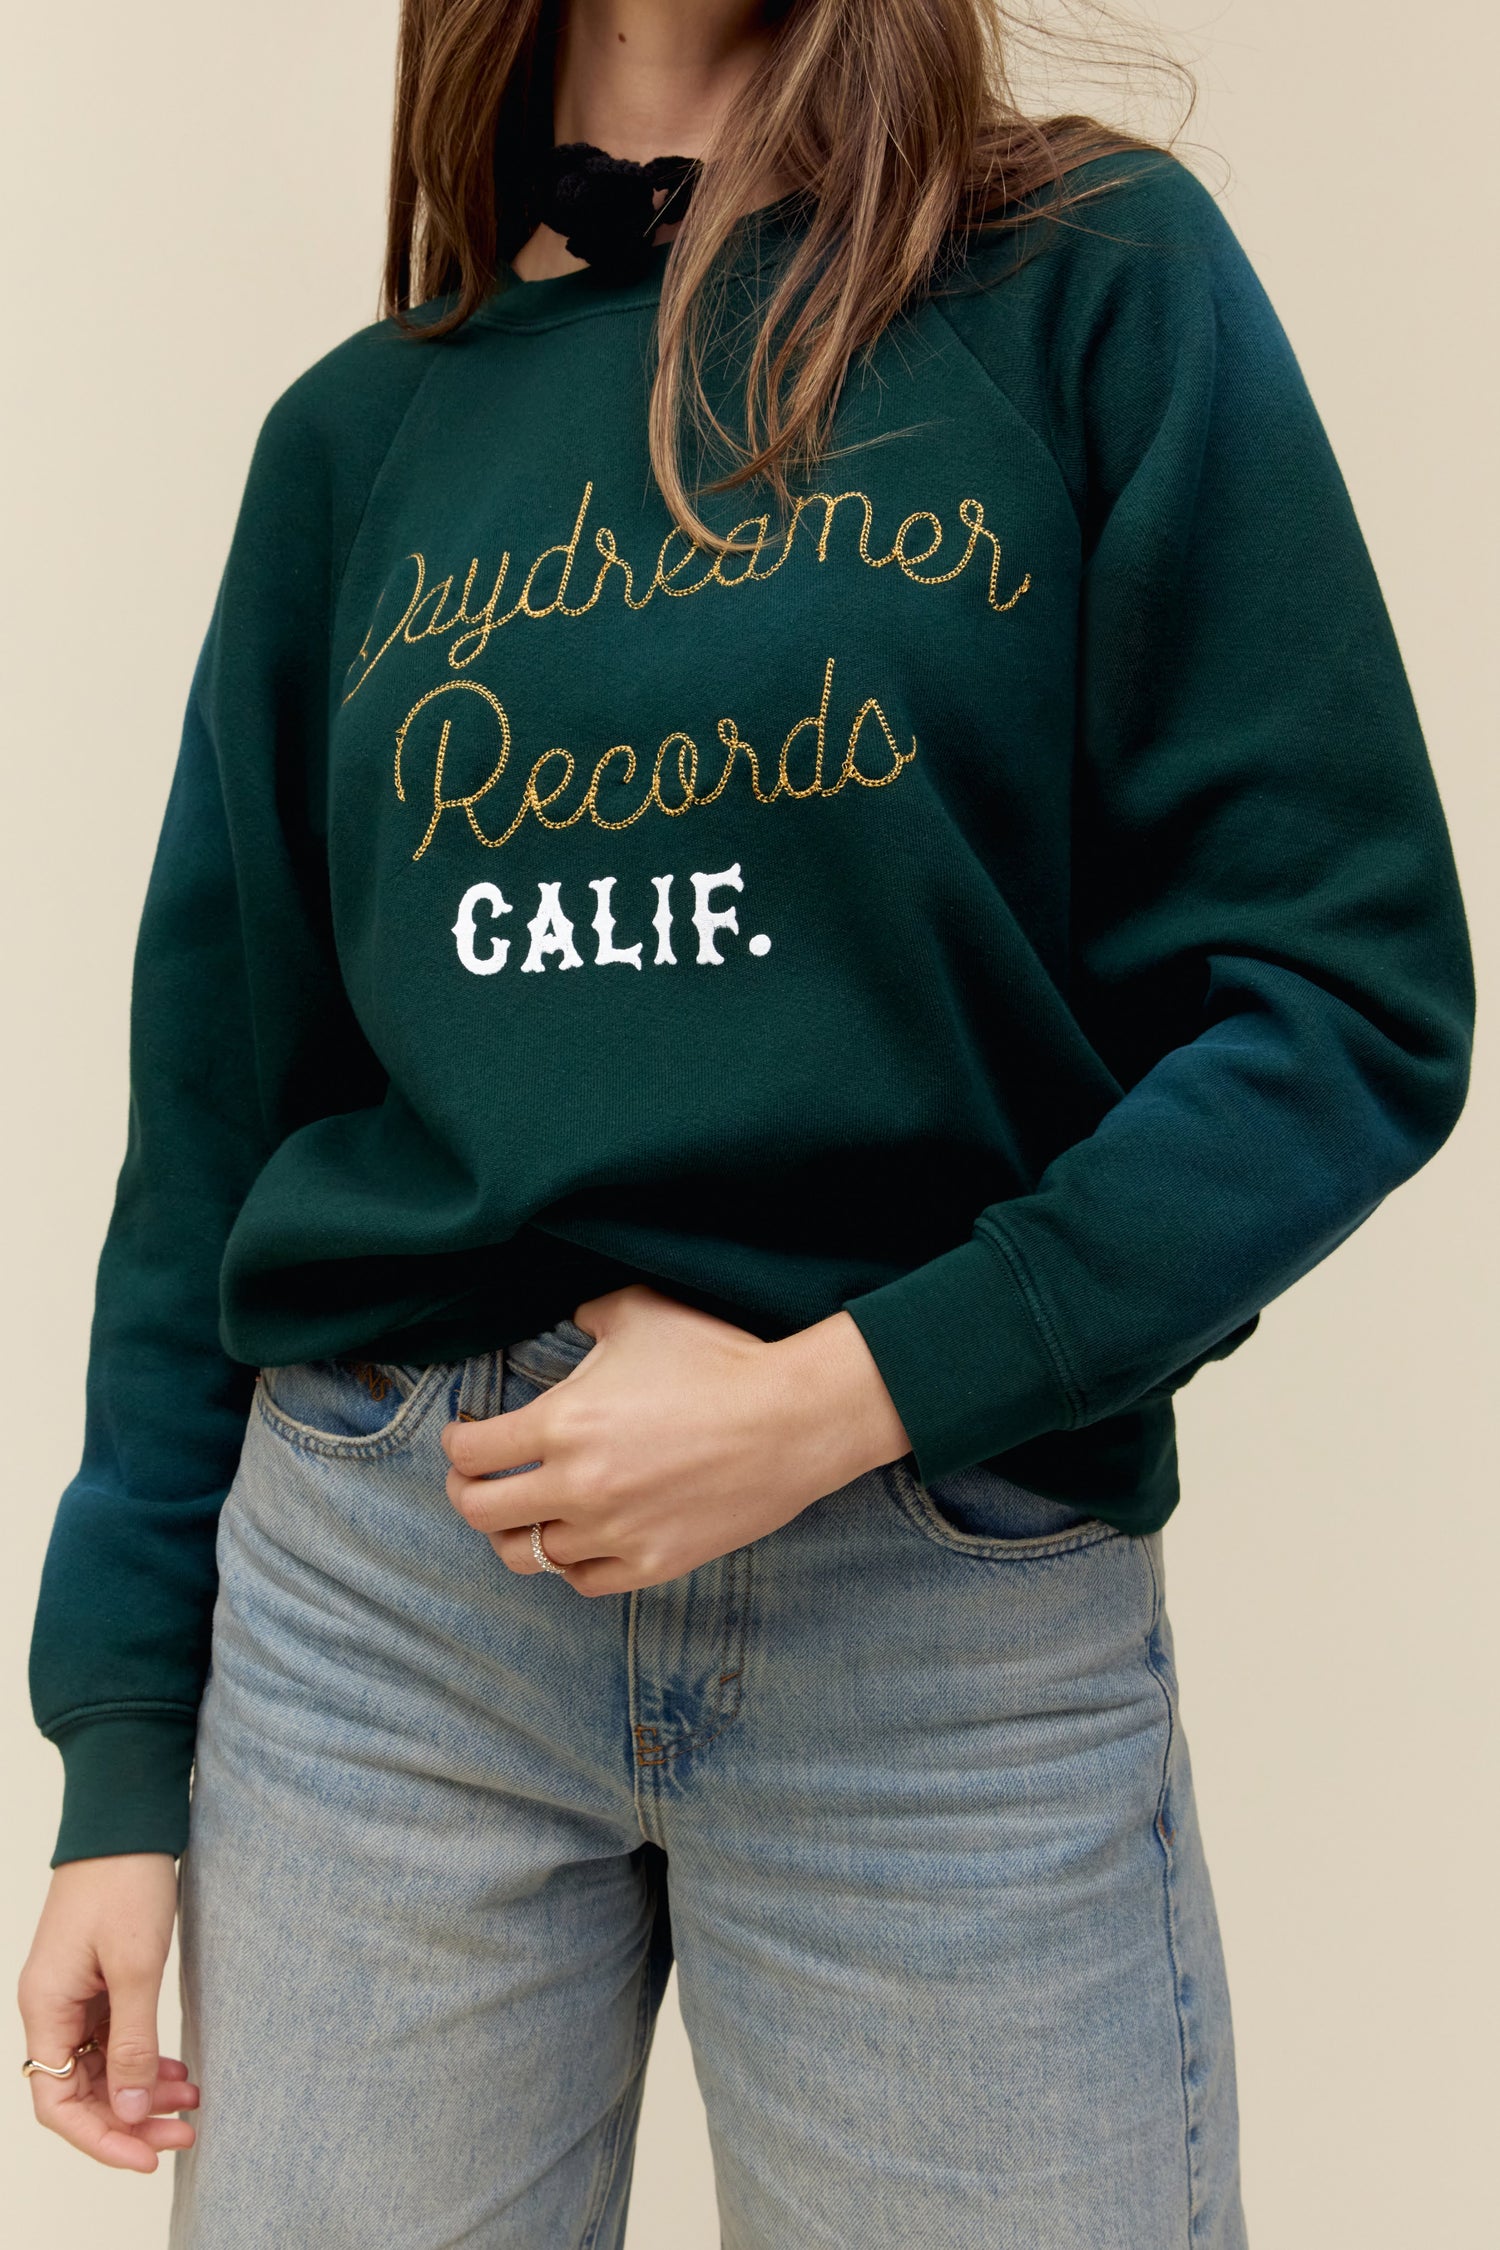 A dark-haired model featuring a green longsleeve stamped with Daydreamer Records in golden cutsive font and calif.